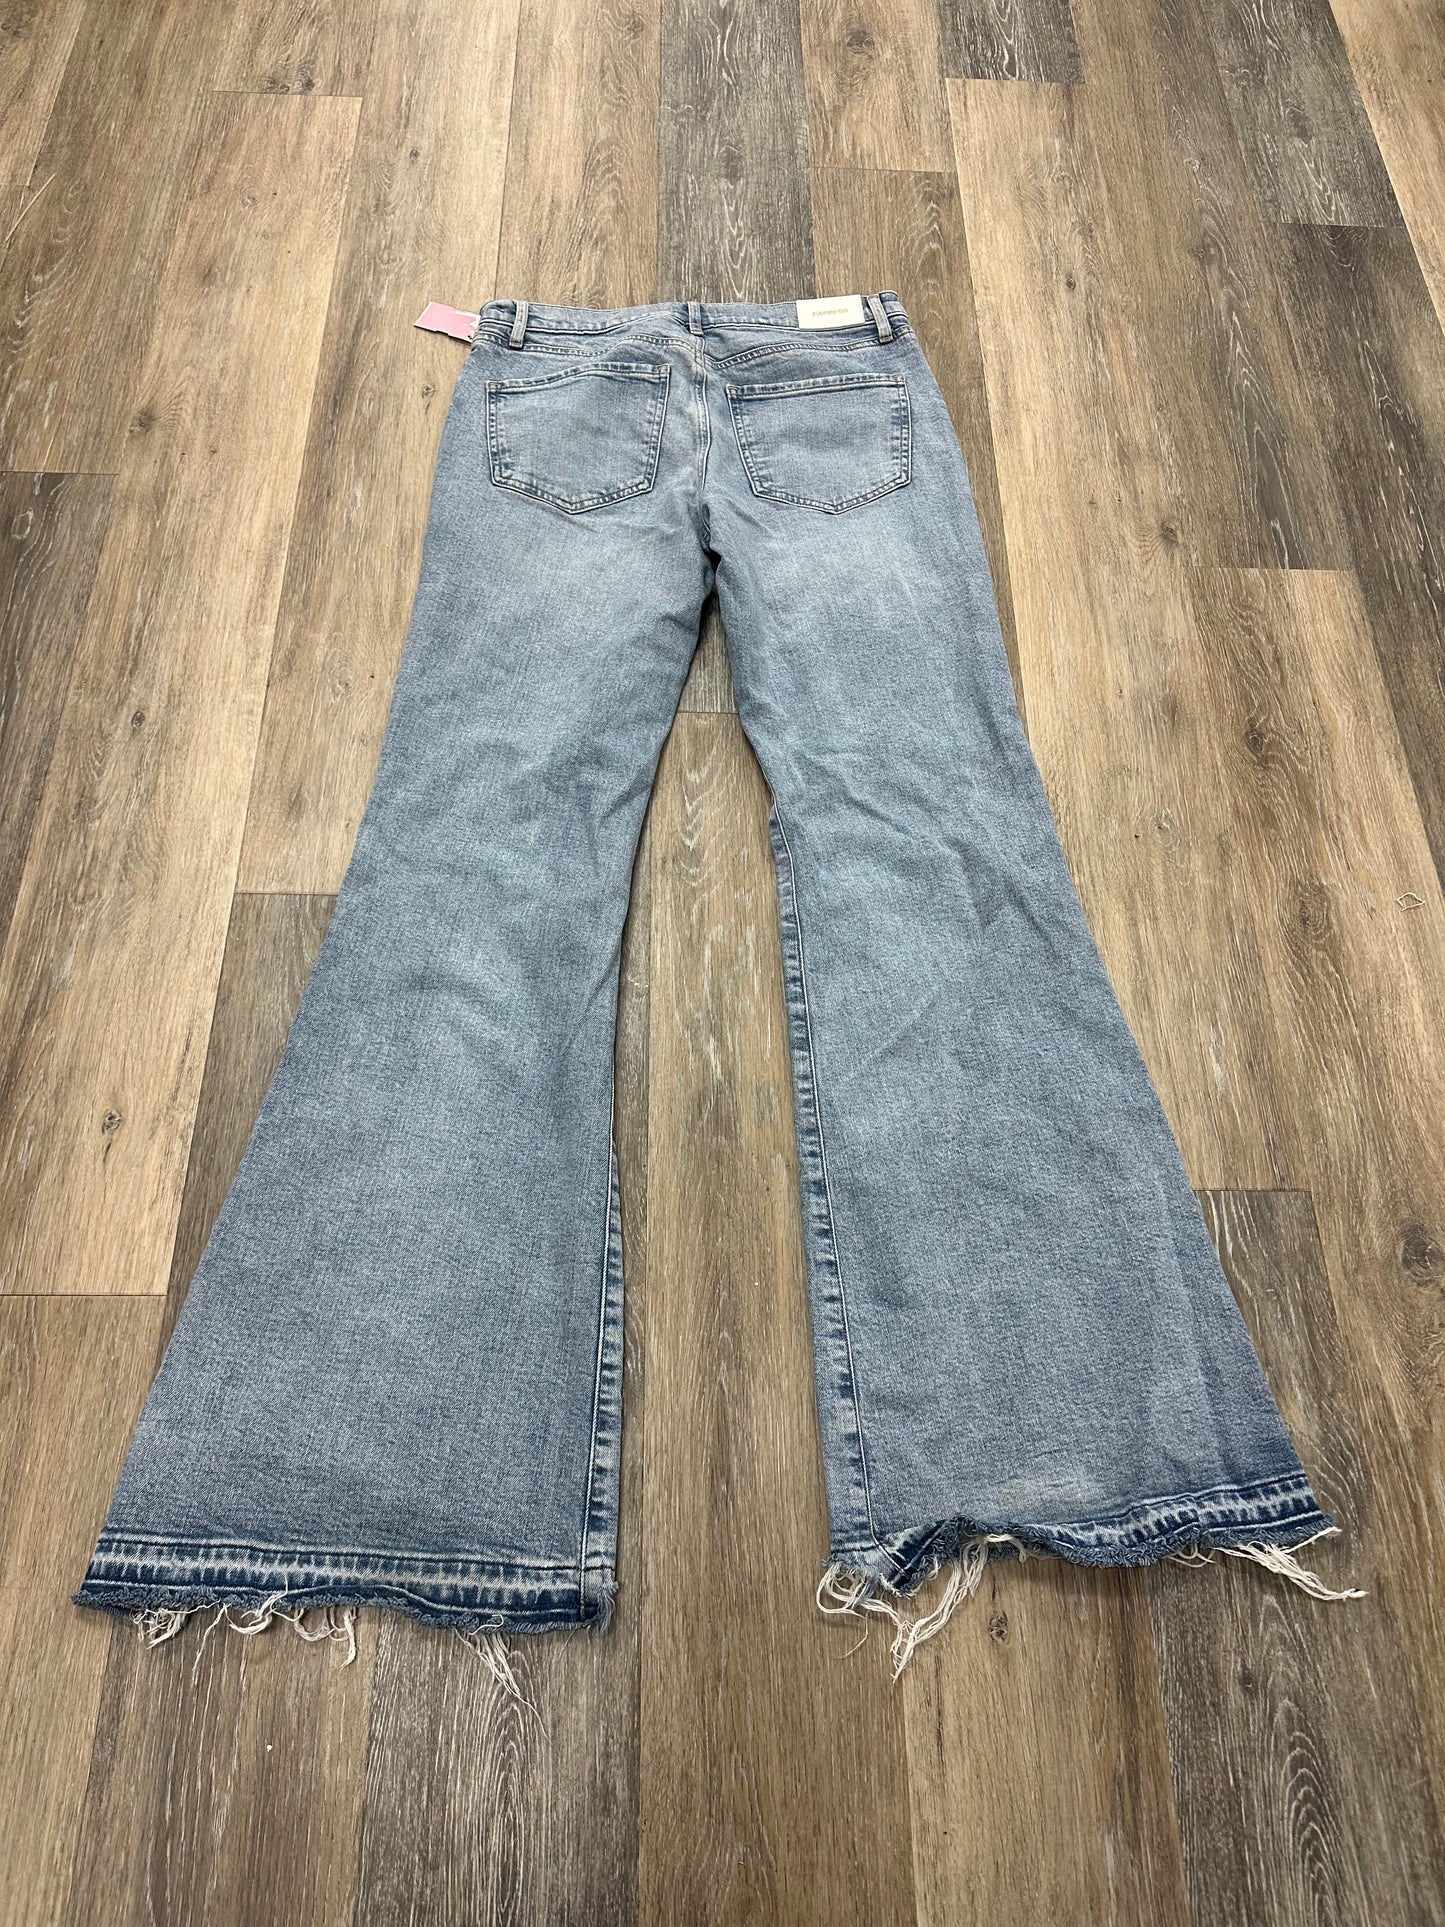 Jeans Flared By Express  Size: 6long